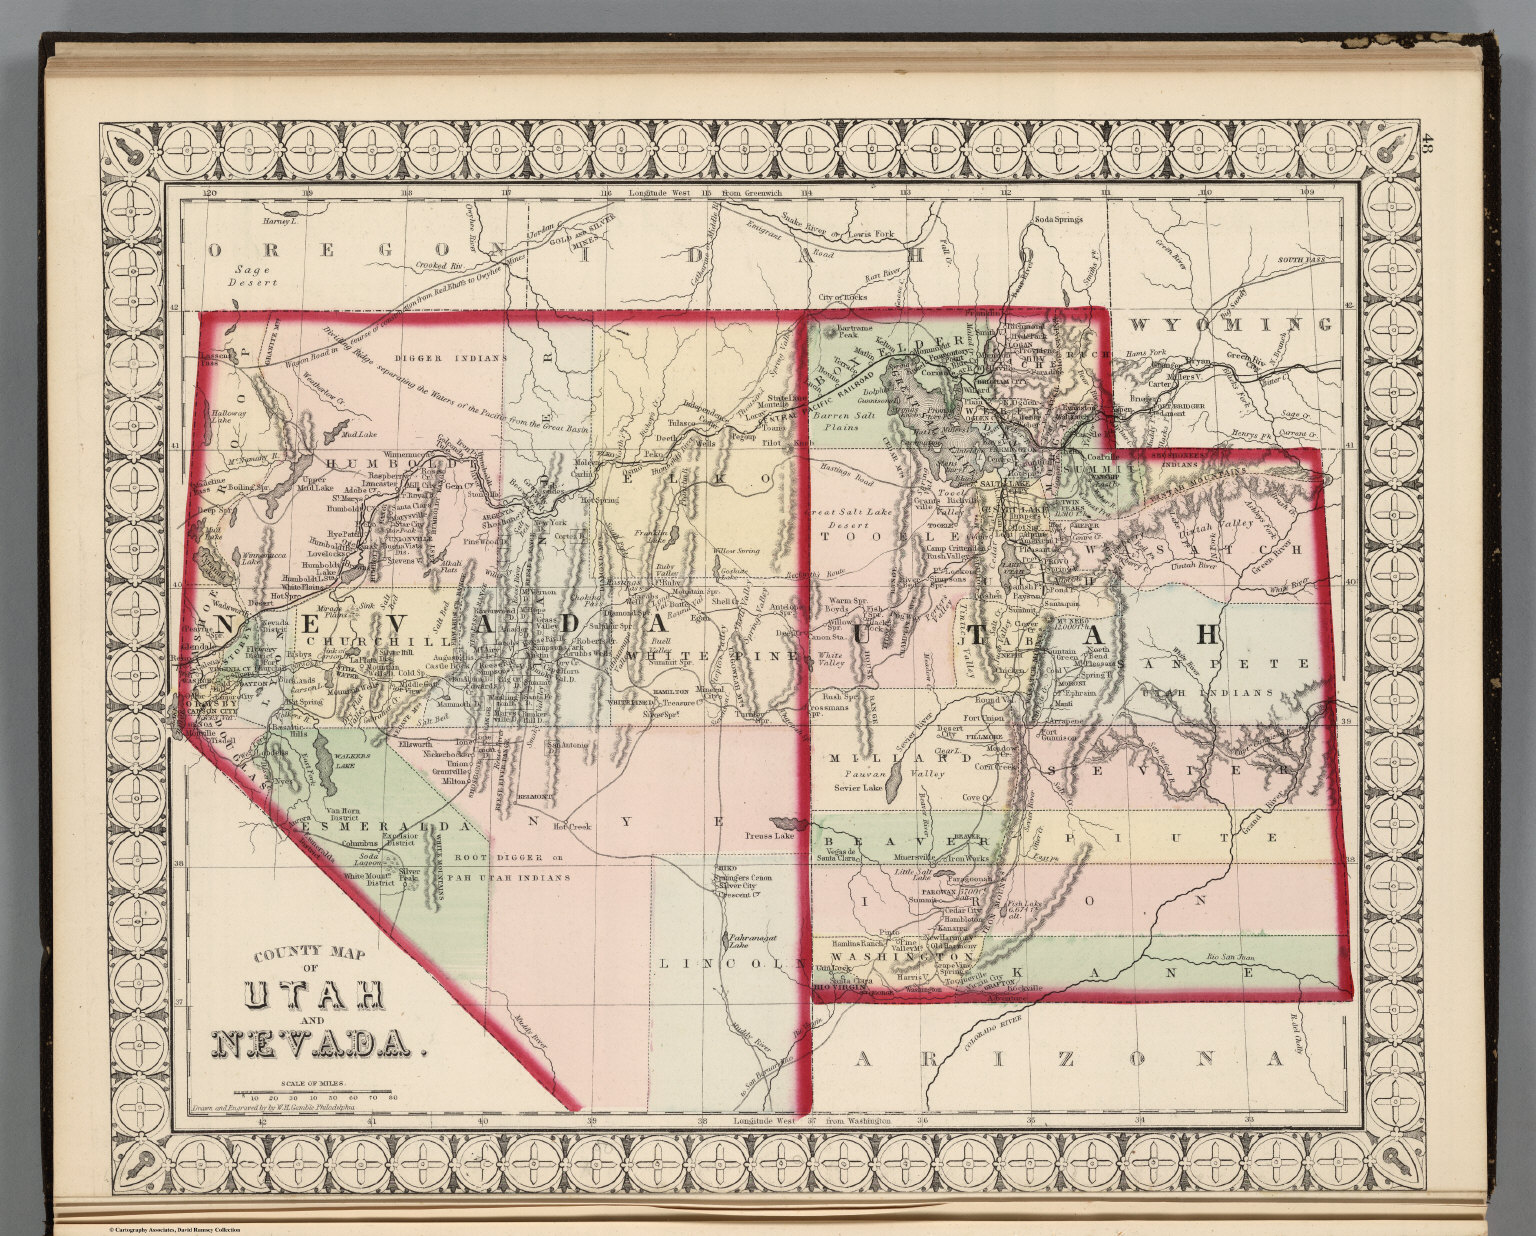 County Map Of Utah And Nevada David Rumsey Historical Map Collection